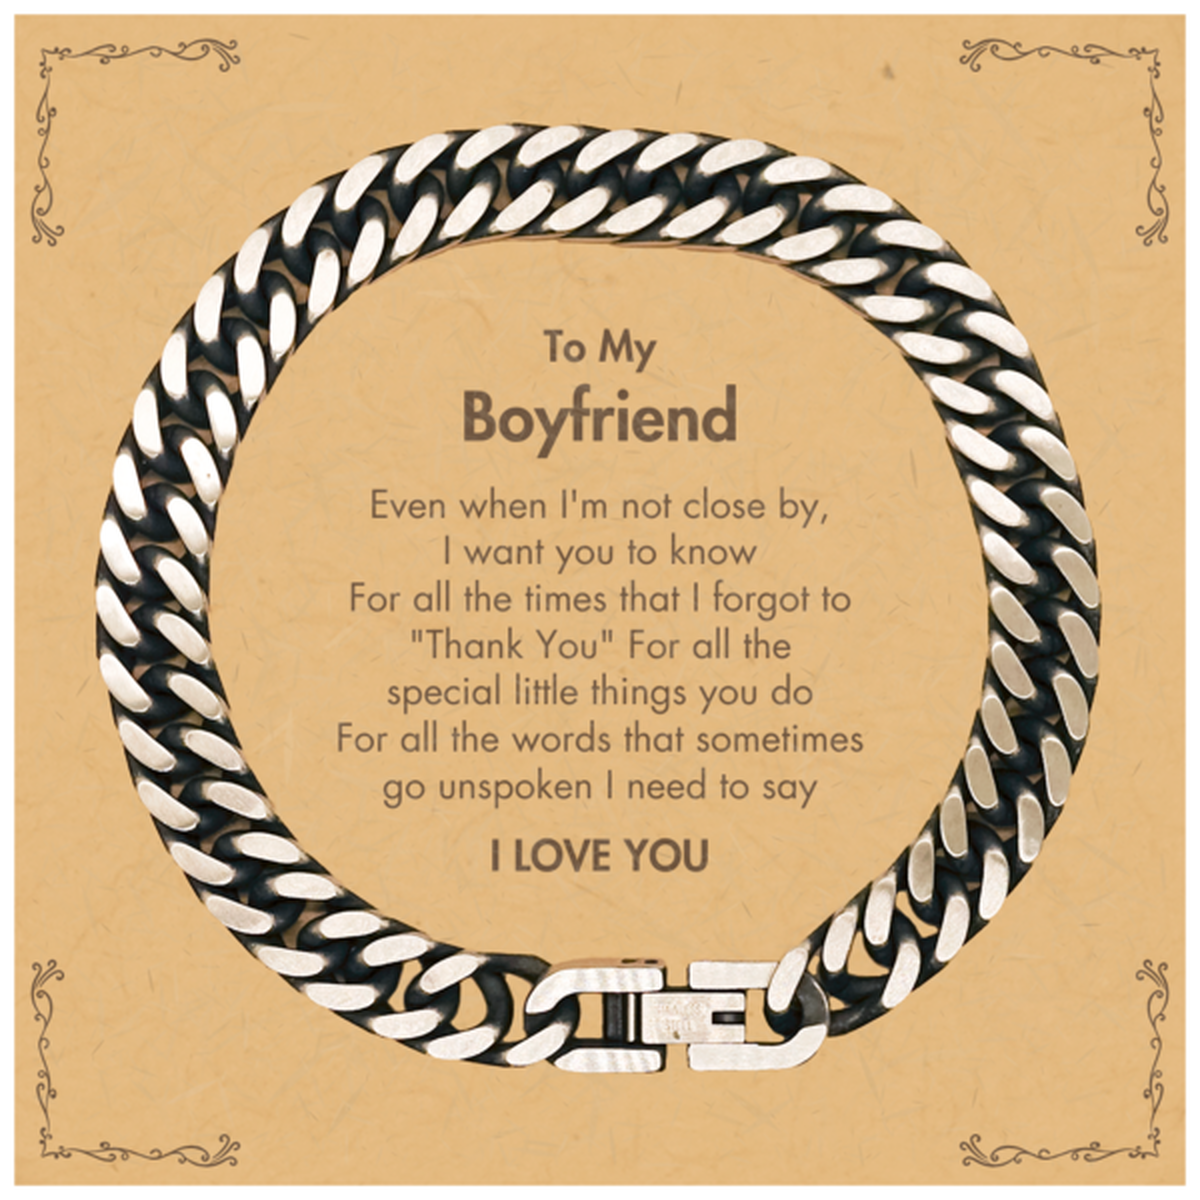 Thank You Gifts for Boyfriend, Keepsake Cuban Link Chain Bracelet Gifts for Boyfriend Birthday Mother's day Father's Day Boyfriend For all the words That sometimes go unspoken I need to say I LOVE YOU